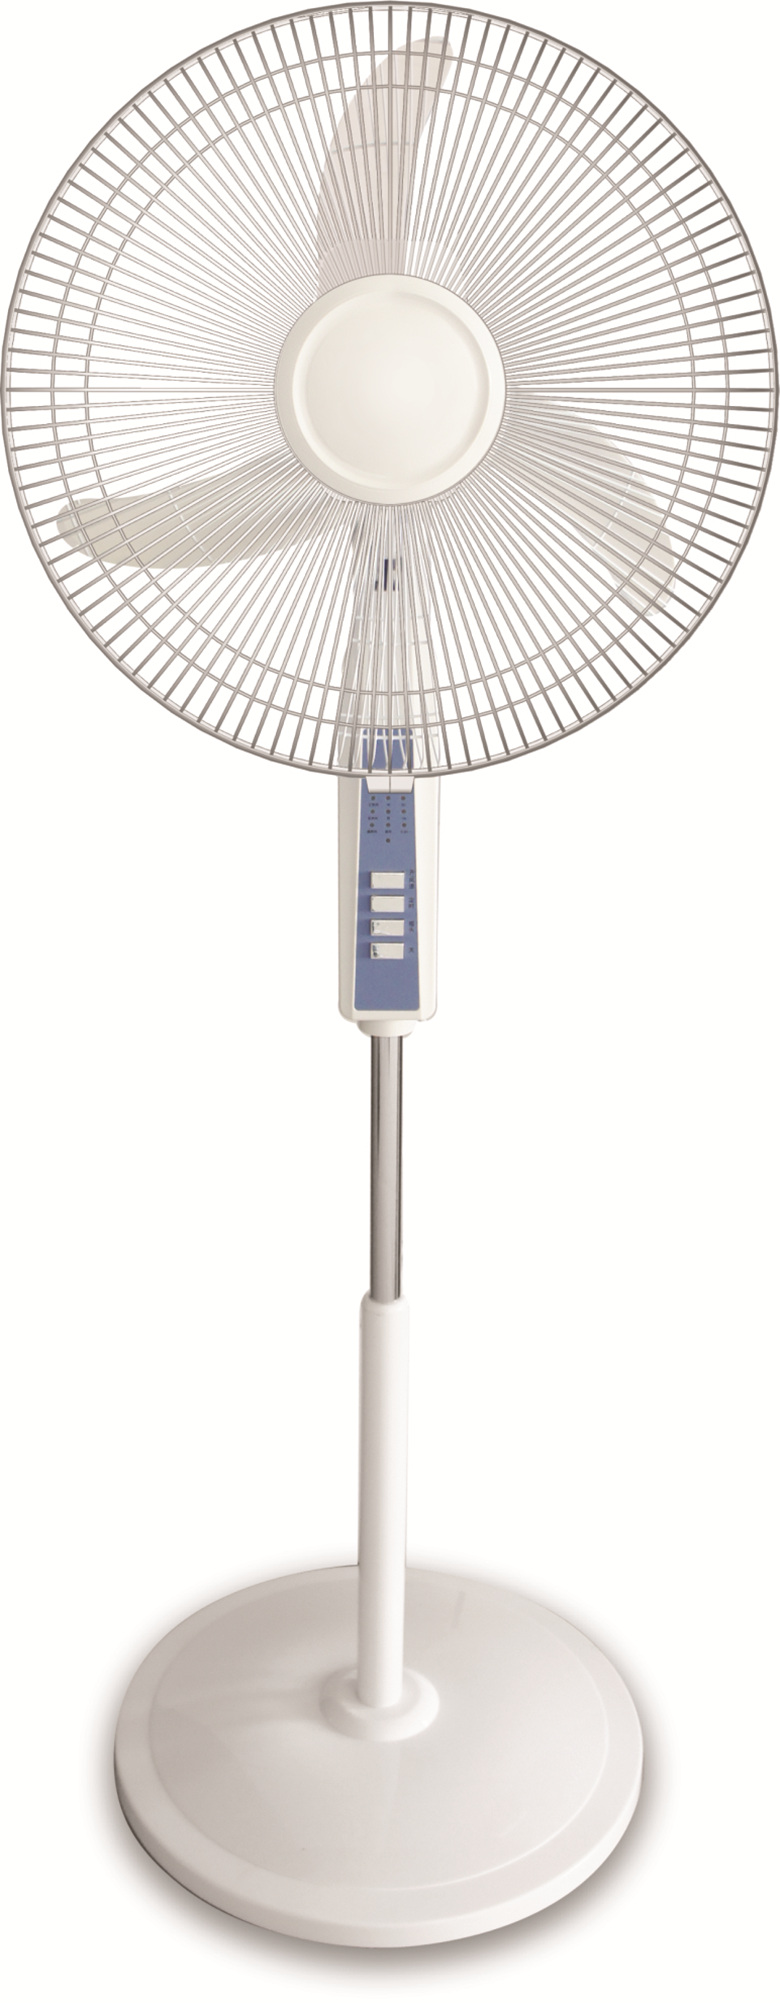 18-inch Remote Stand Fan, LED Shower, 3 Breeze Modes